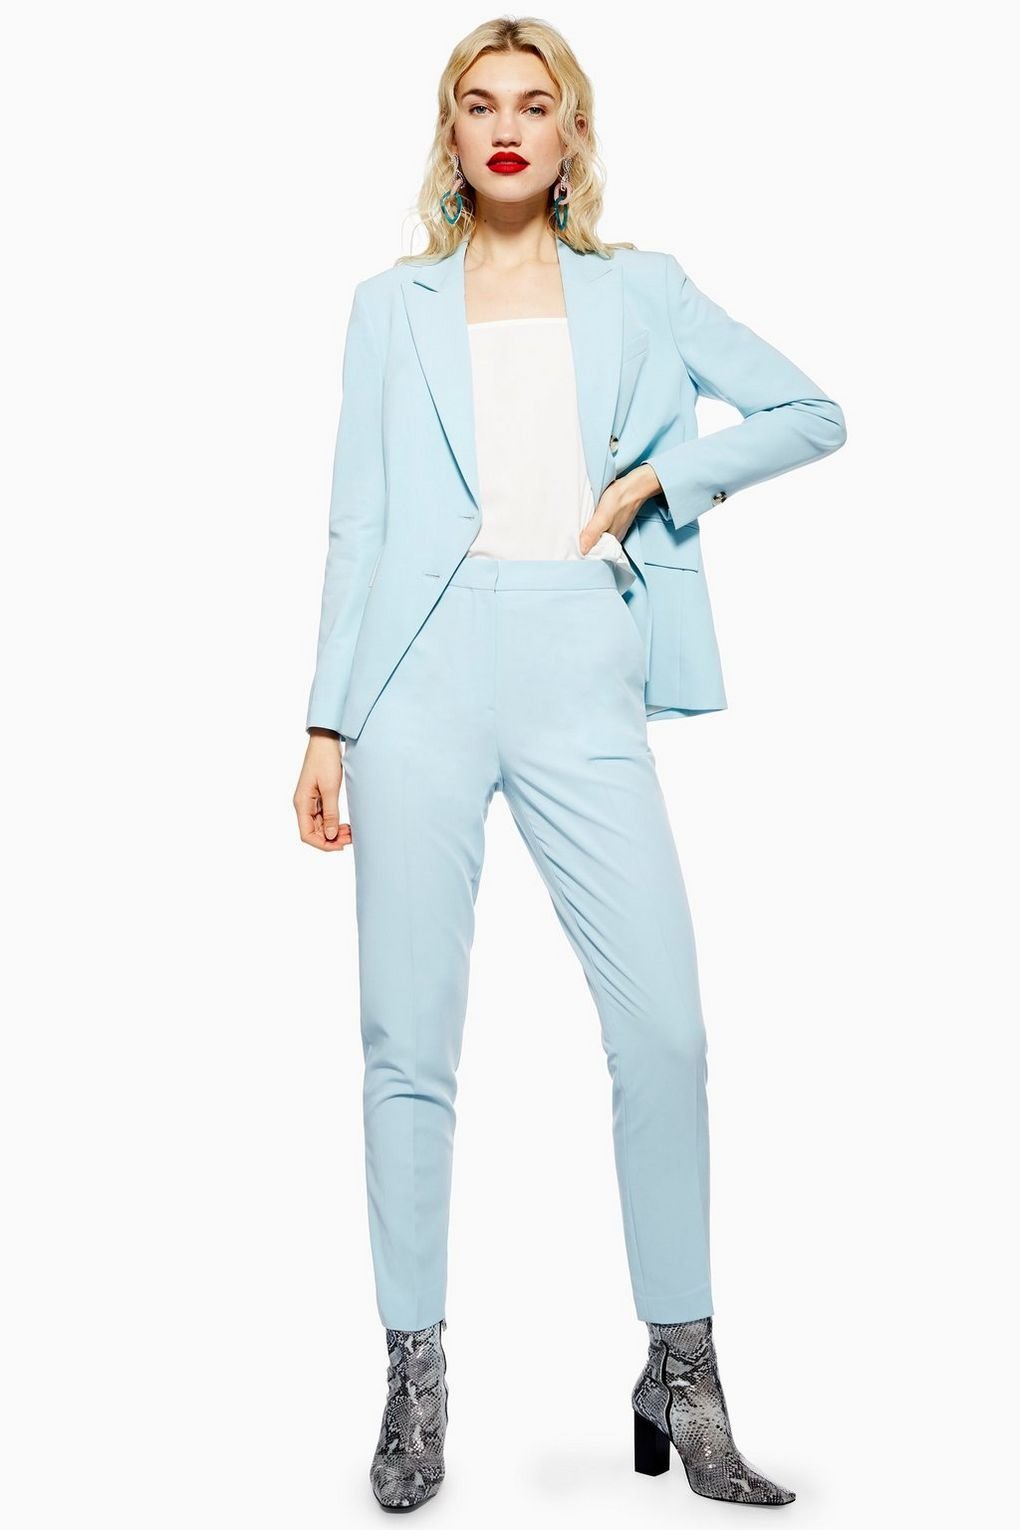 6 Of The Best Trouser Suits For Women 